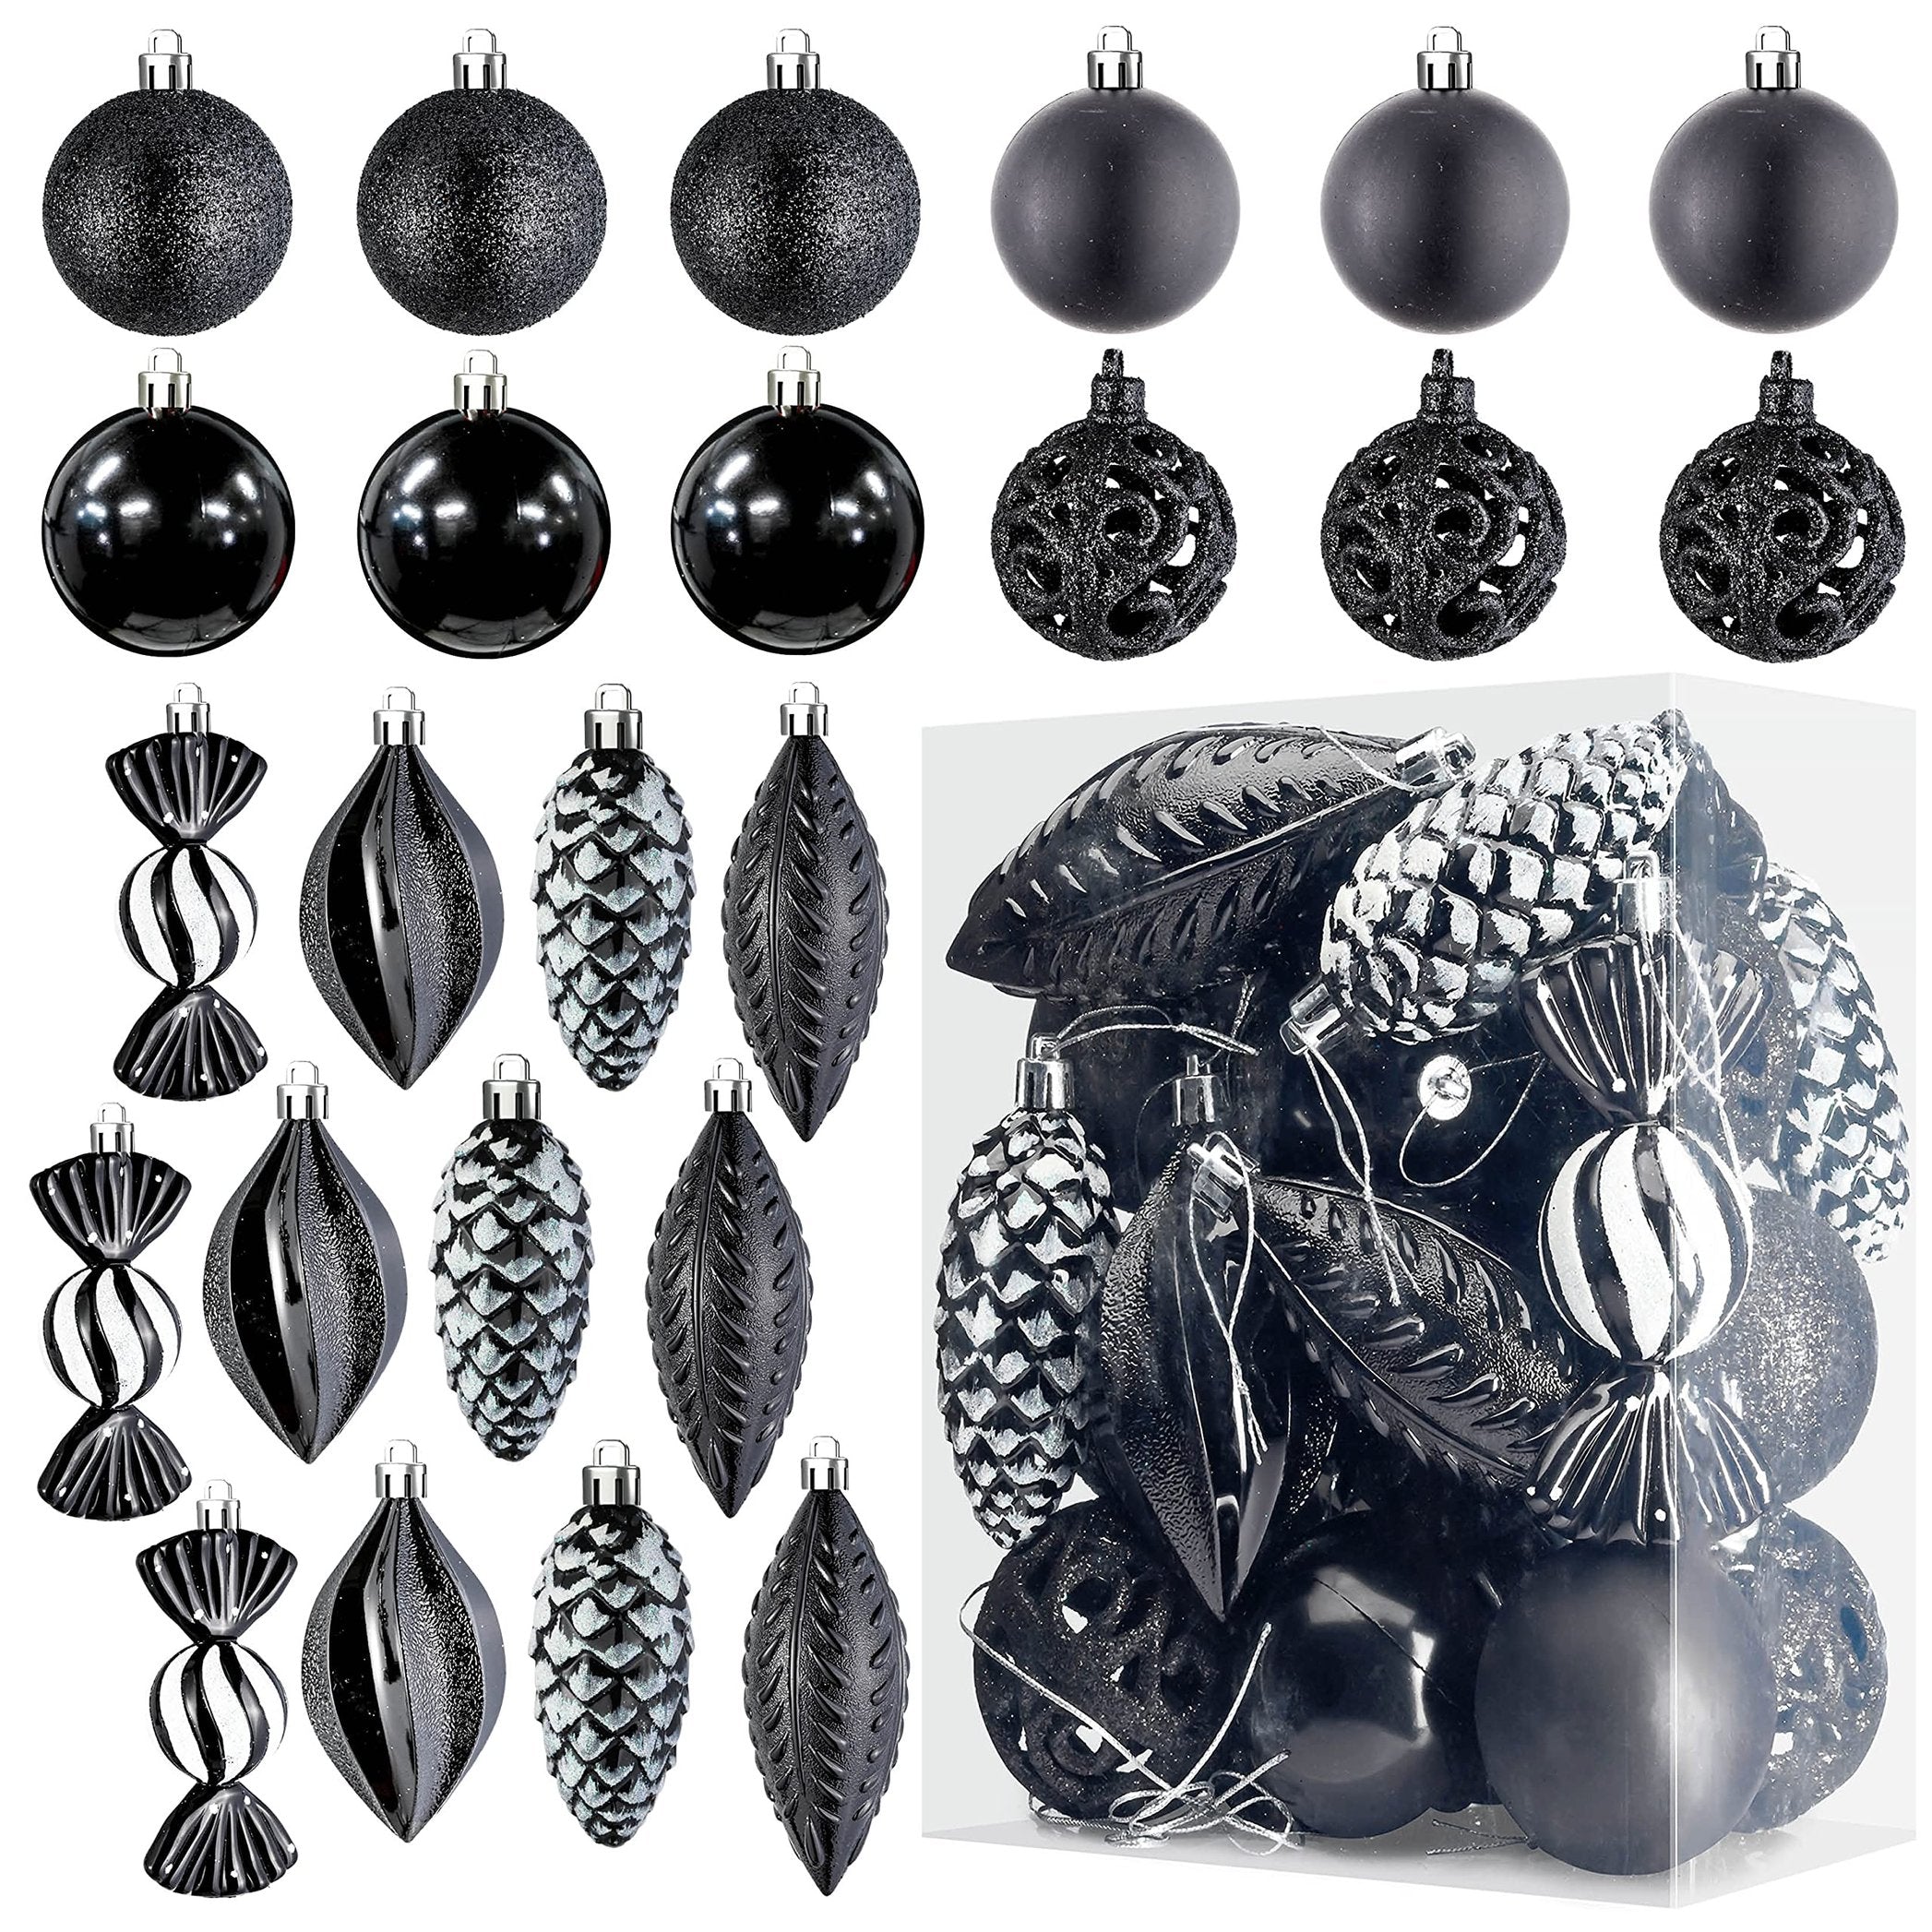 Grey Christmas Ball Ornaments for Christmas Decorations (Grey) | 24 pcs Xmas Tree Shatterproof Ornaments with Hanging Loop for Holiday, Wreath and Party Decorations